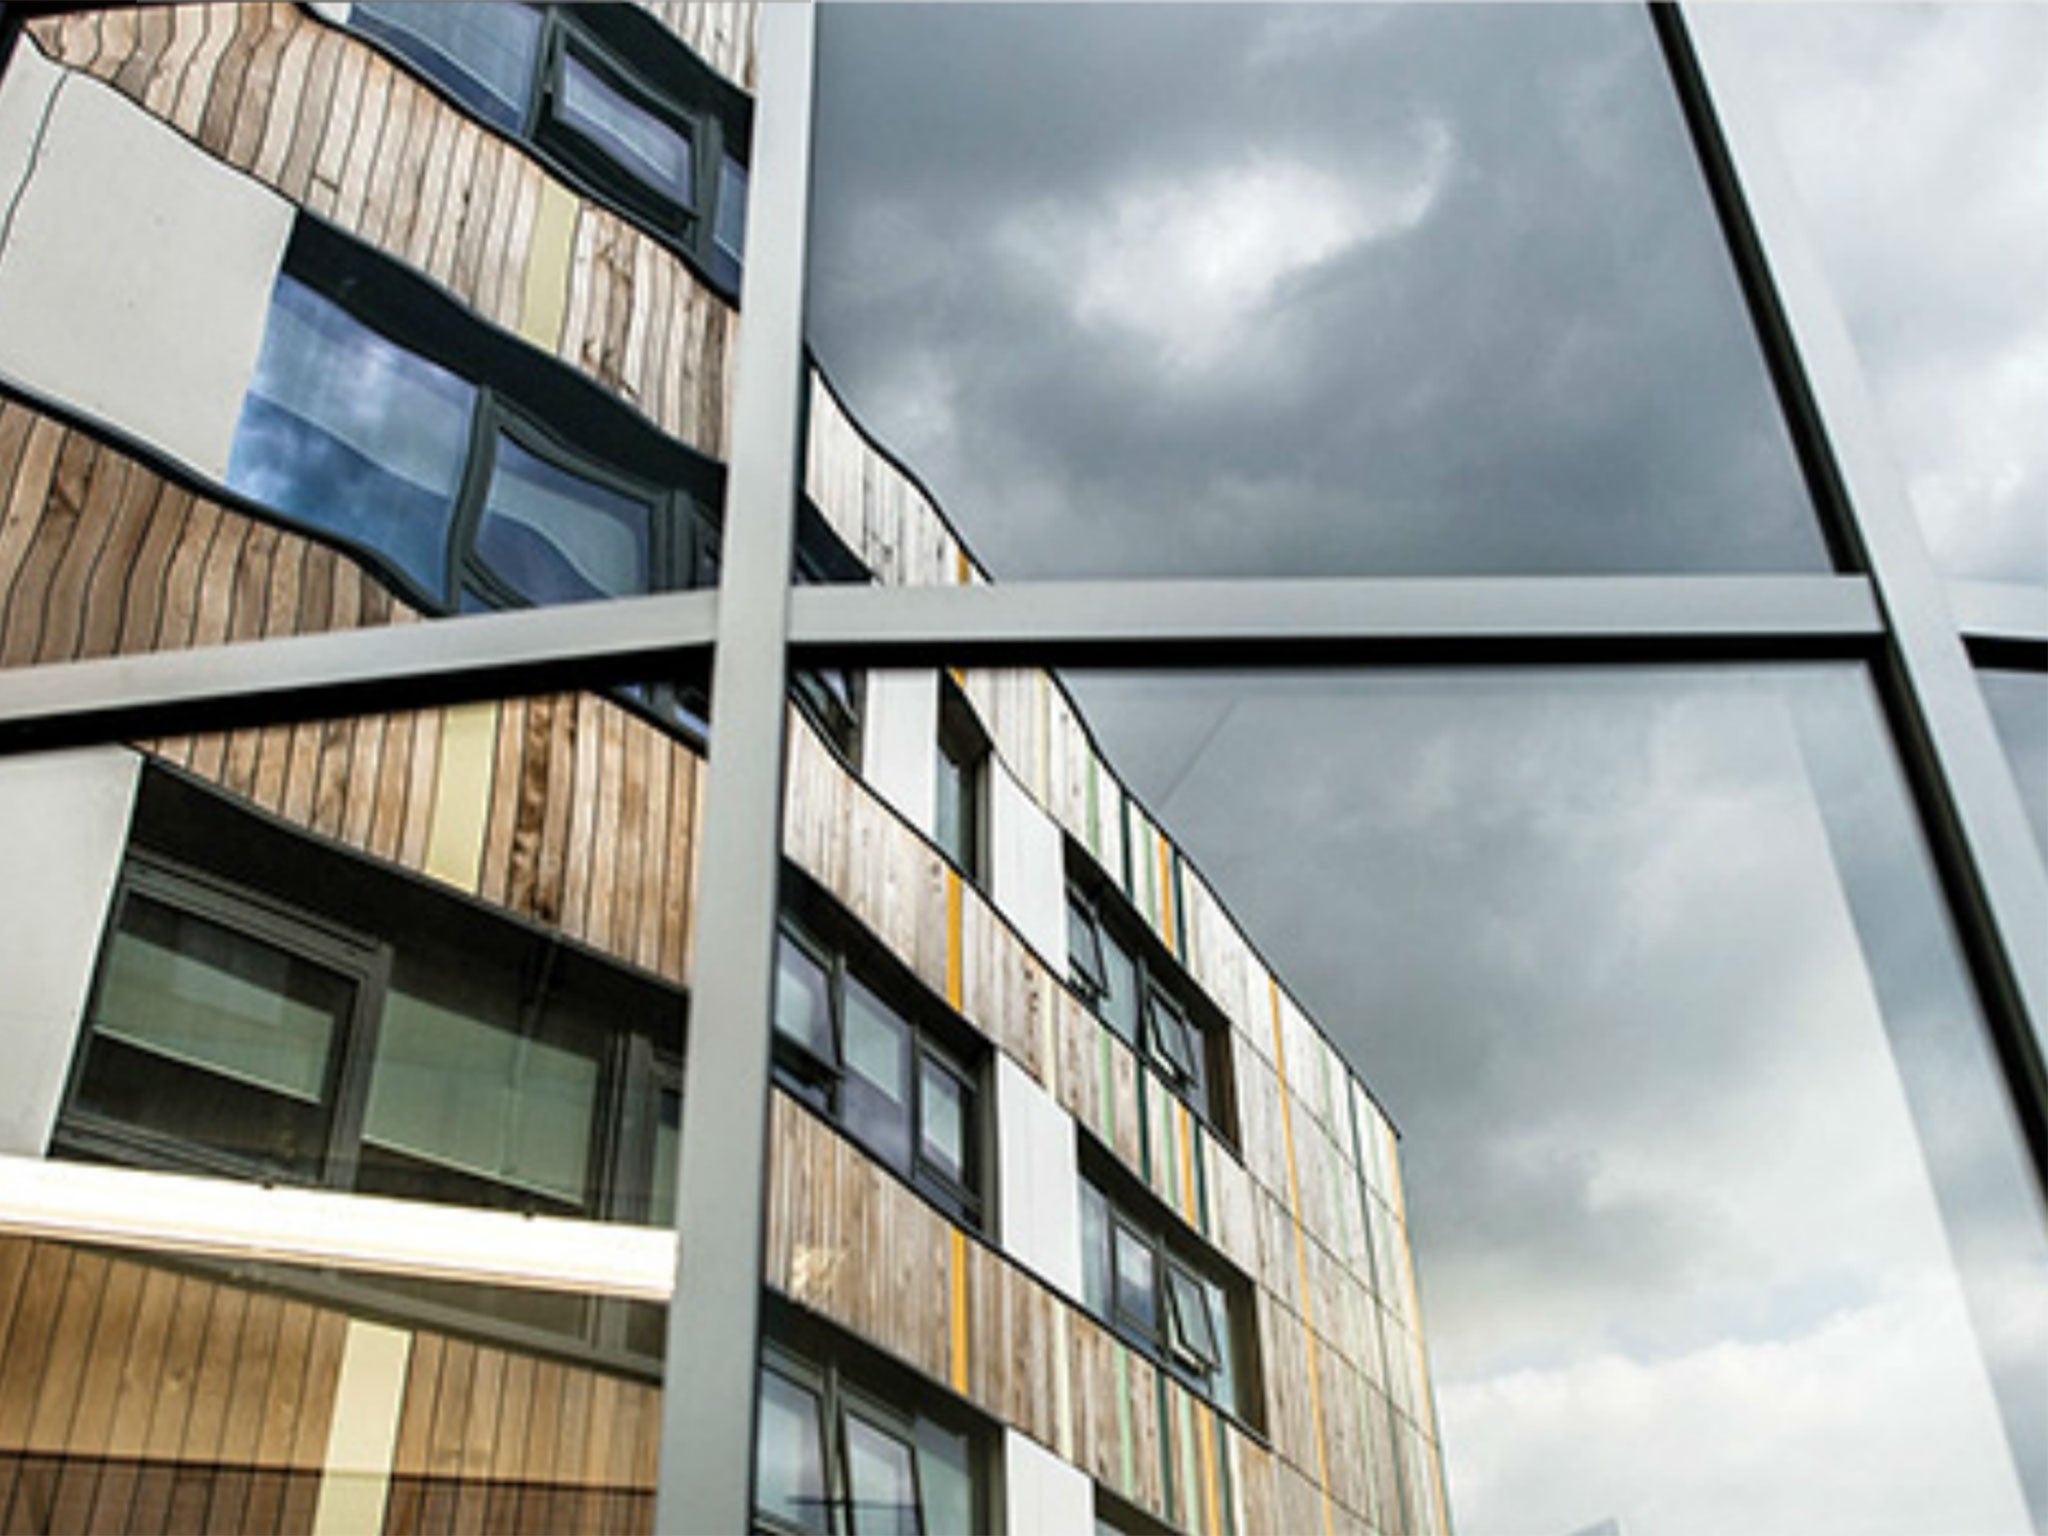 An image from Crest Academies' website showing its expensive new campus building